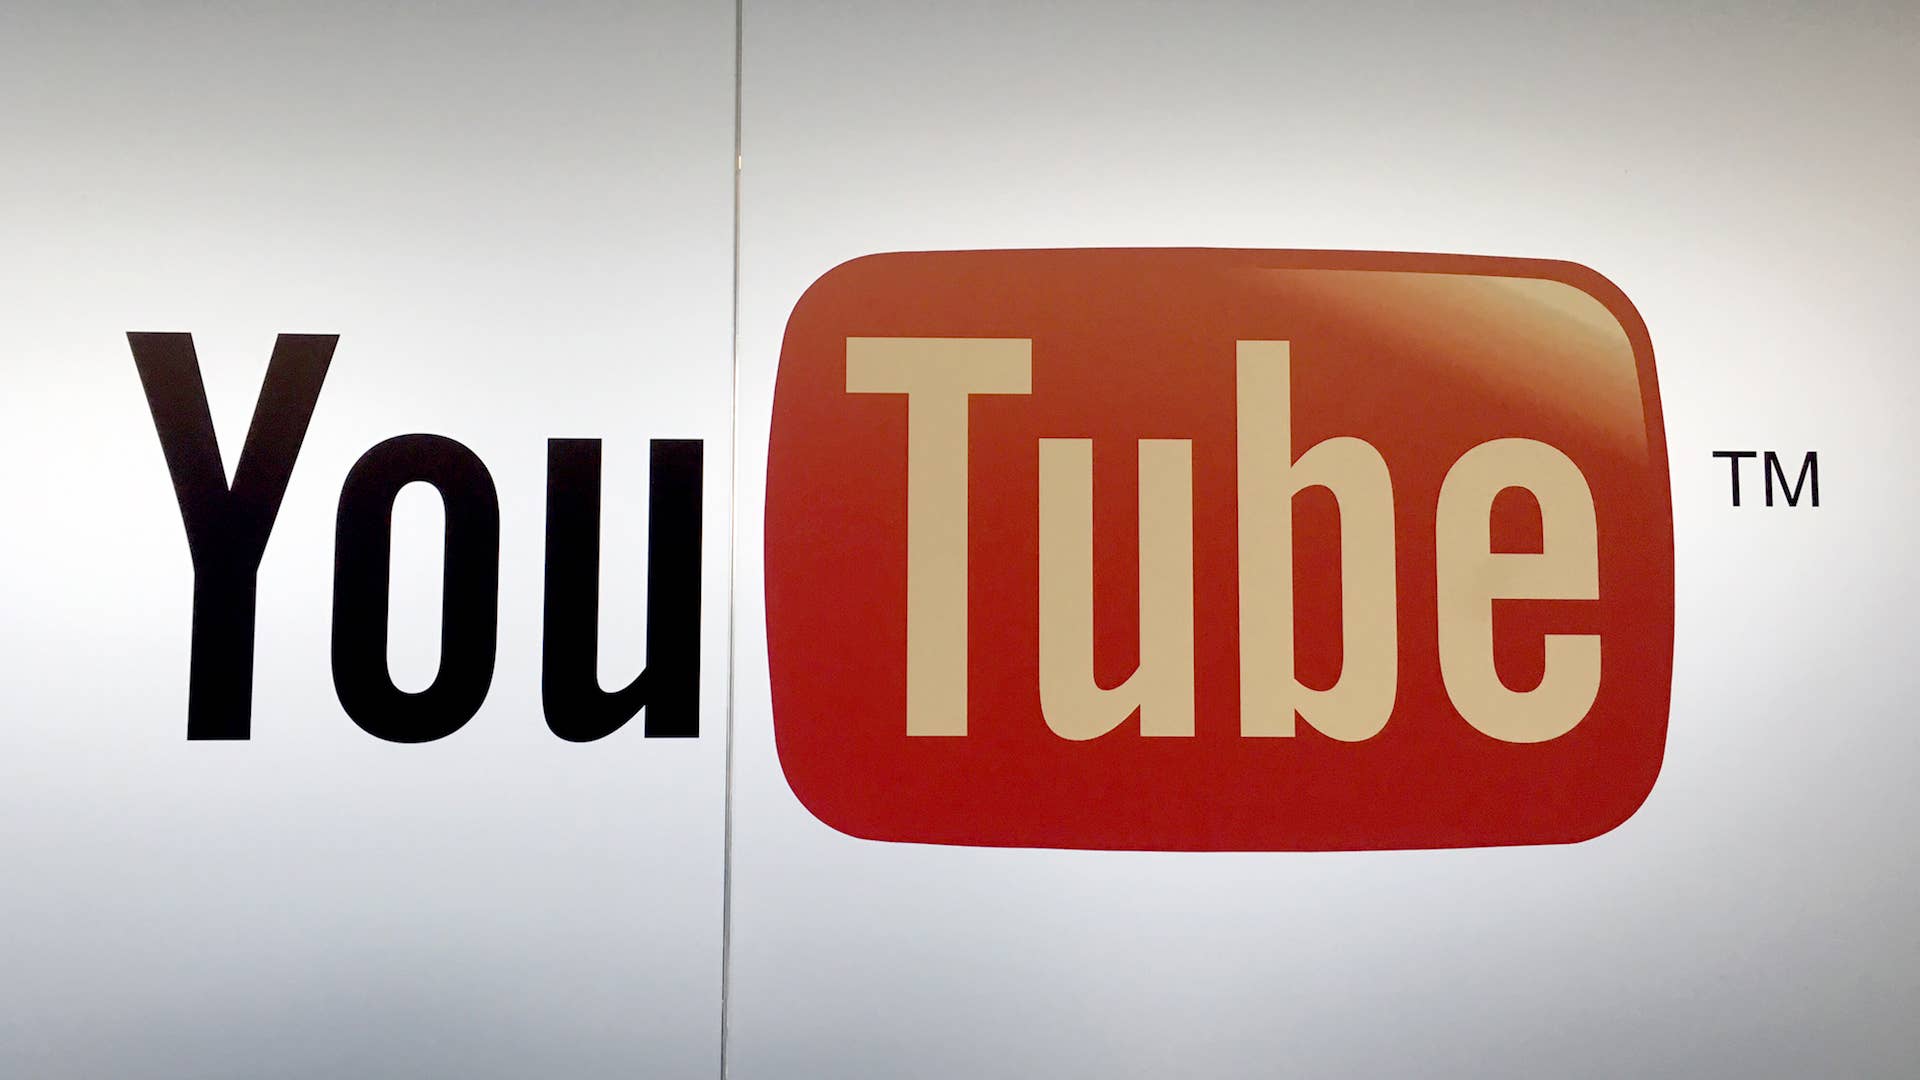 The logo of YouTube can be seen at the Google offices in Zurich, Switzerland.